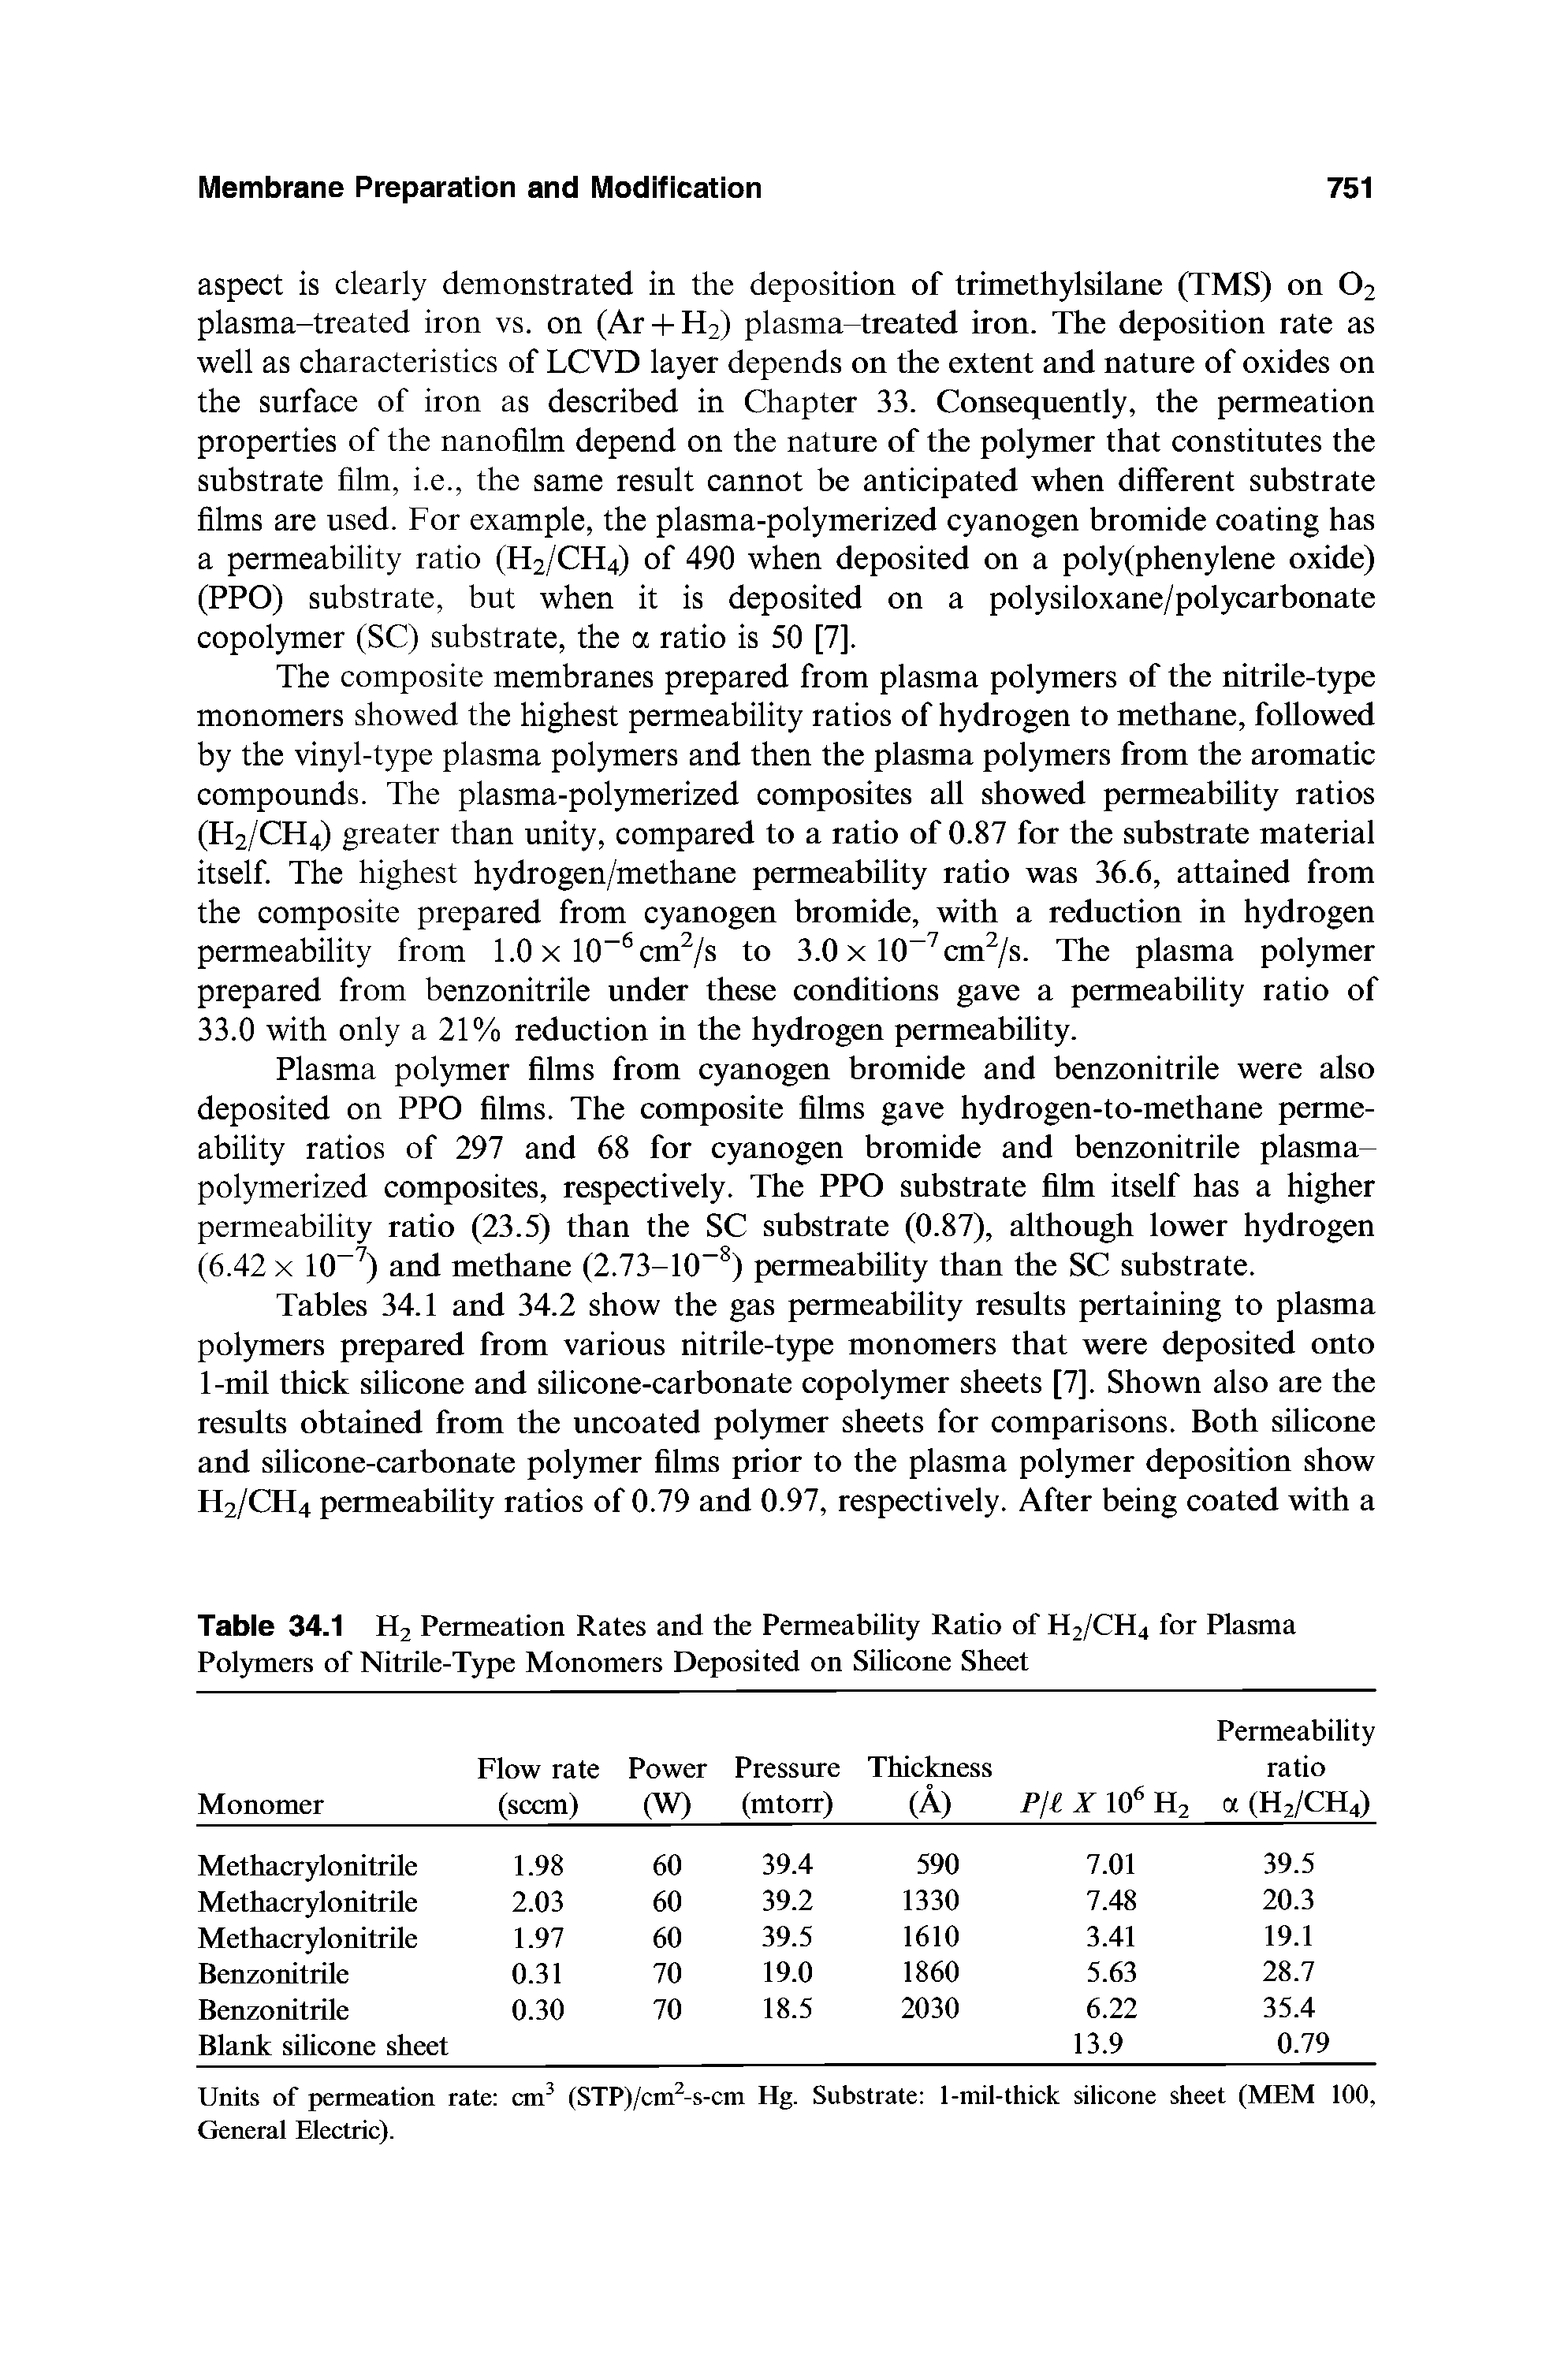 Tables 34.1 and 34.2 show the gas permeability results pertaining to plasma polymers prepared from various nitrile-type monomers that were deposited onto 1-mil thick silicone and silicone-carbonate copolymer sheets [7]. Shown also are the results obtained from the uncoated polymer sheets for comparisons. Both silicone and silicone-carbonate polymer films prior to the plasma polymer deposition show H2/CH4 permeability ratios of 0.79 and 0.97, respectively. After being coated with a...